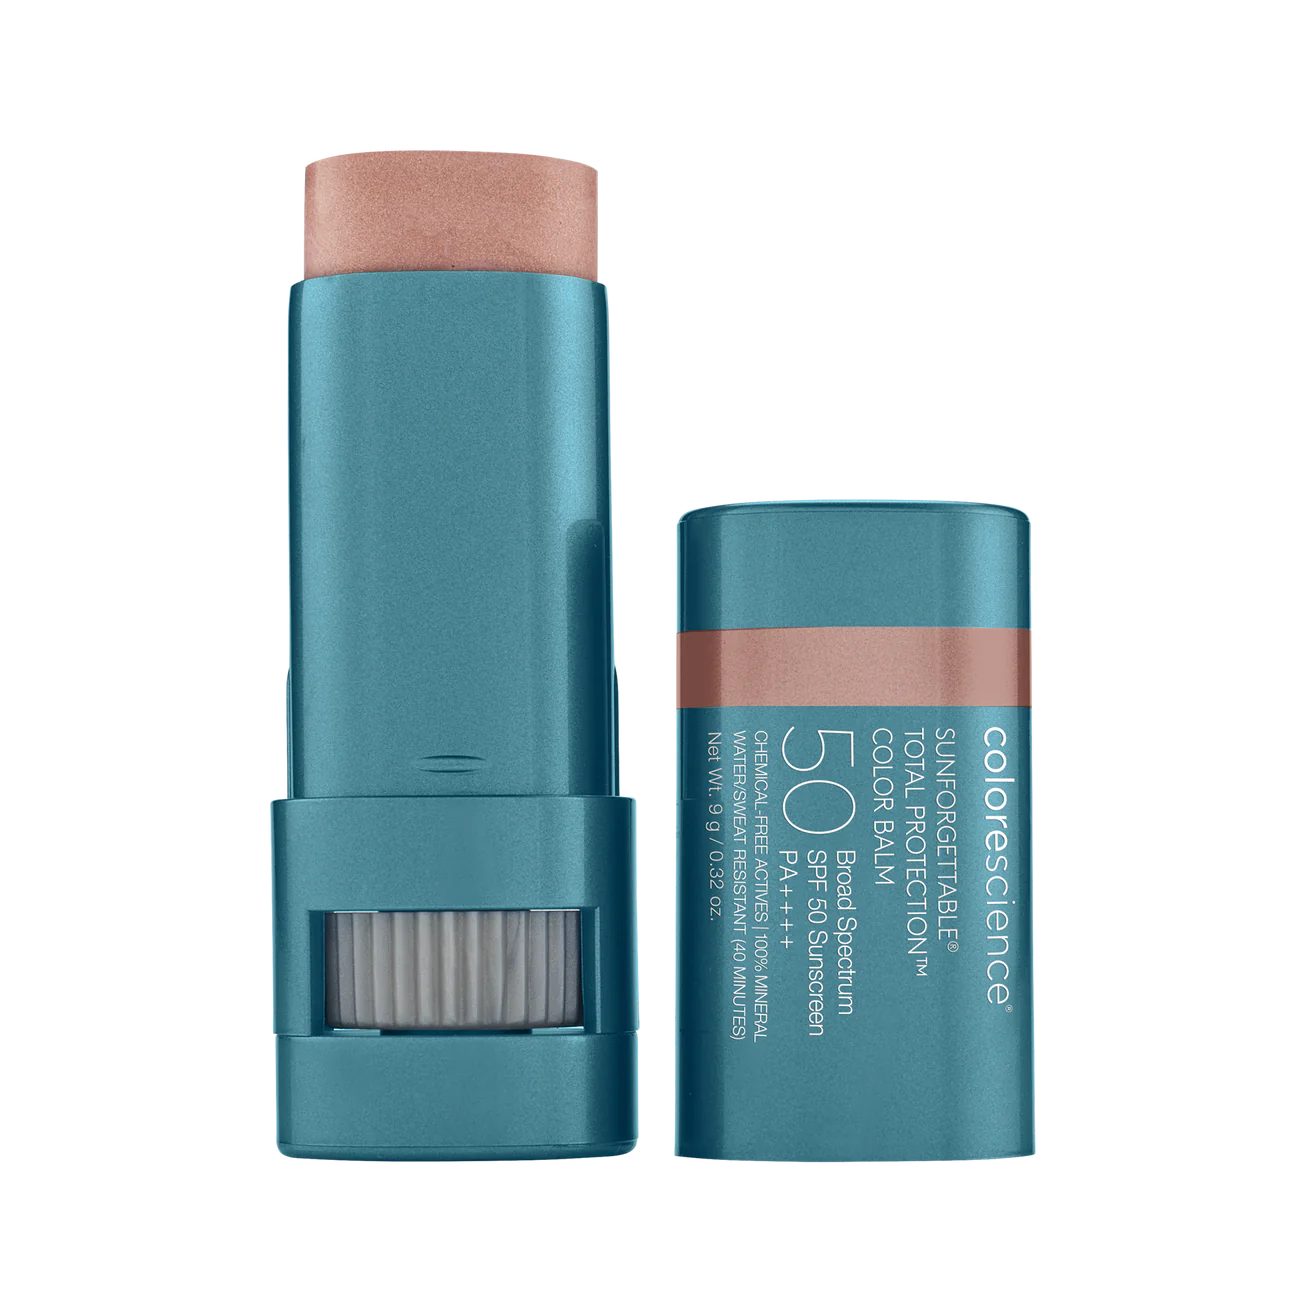 Colorescience Sunforgettable Total Protection Color Balm SPF 50 in Blush